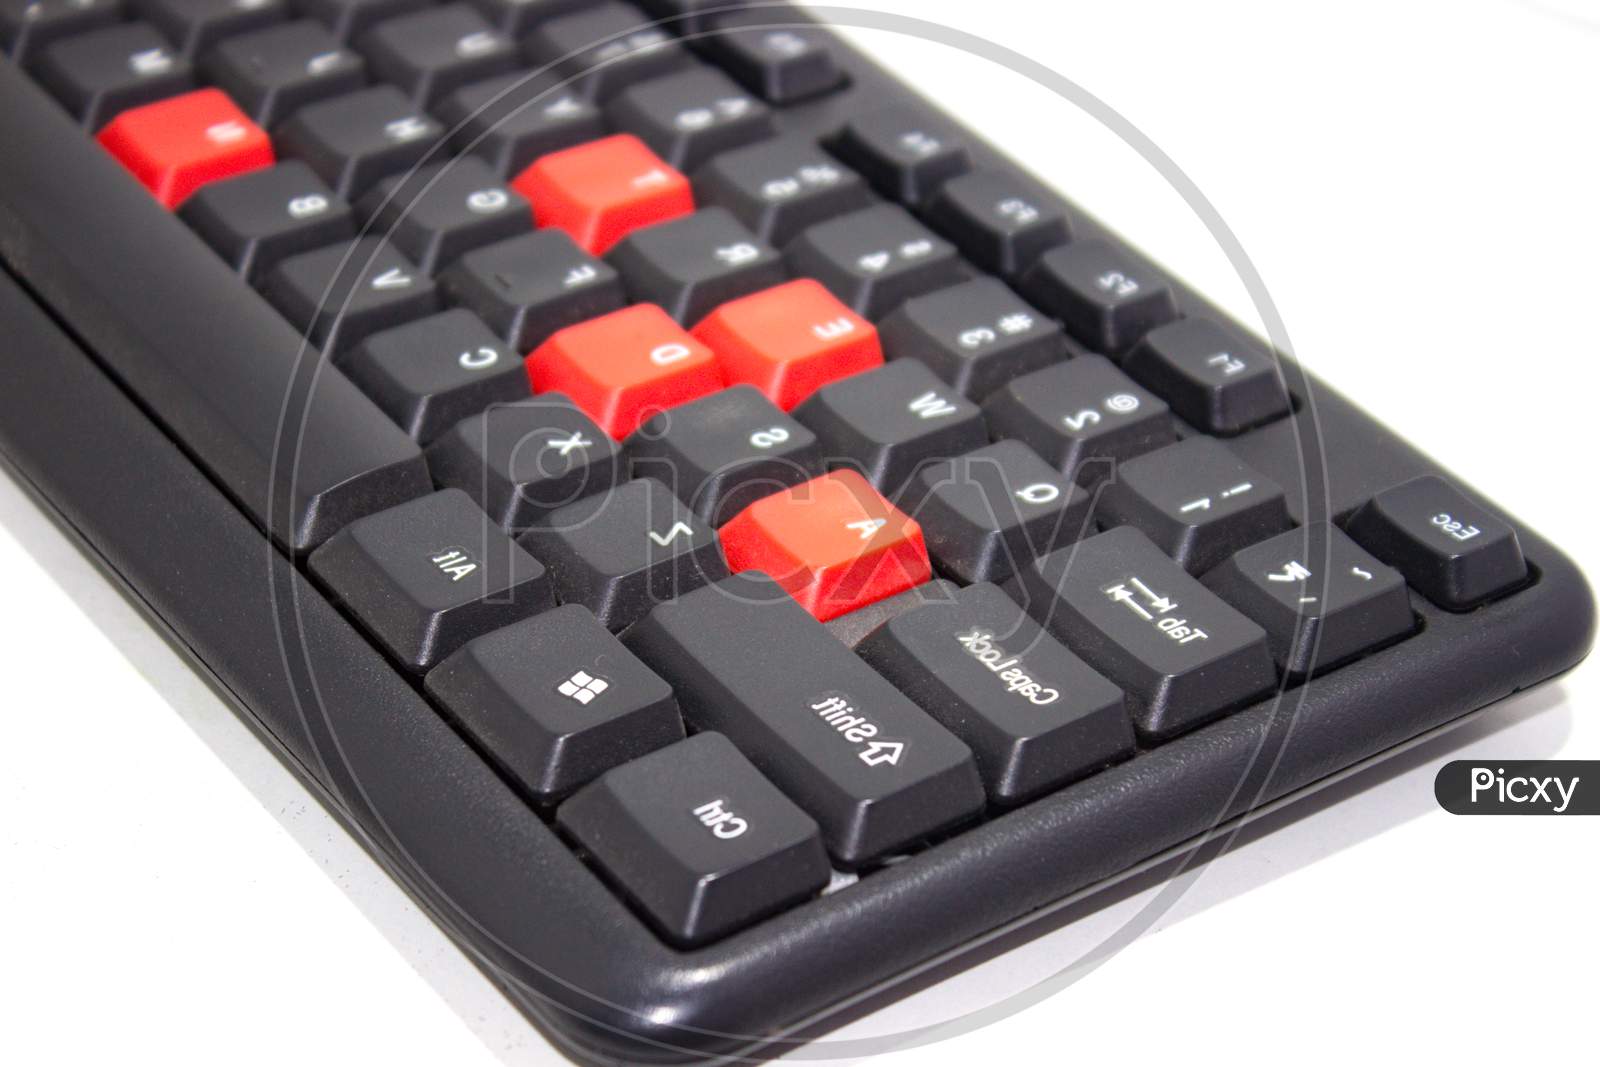 A picture of keyboard